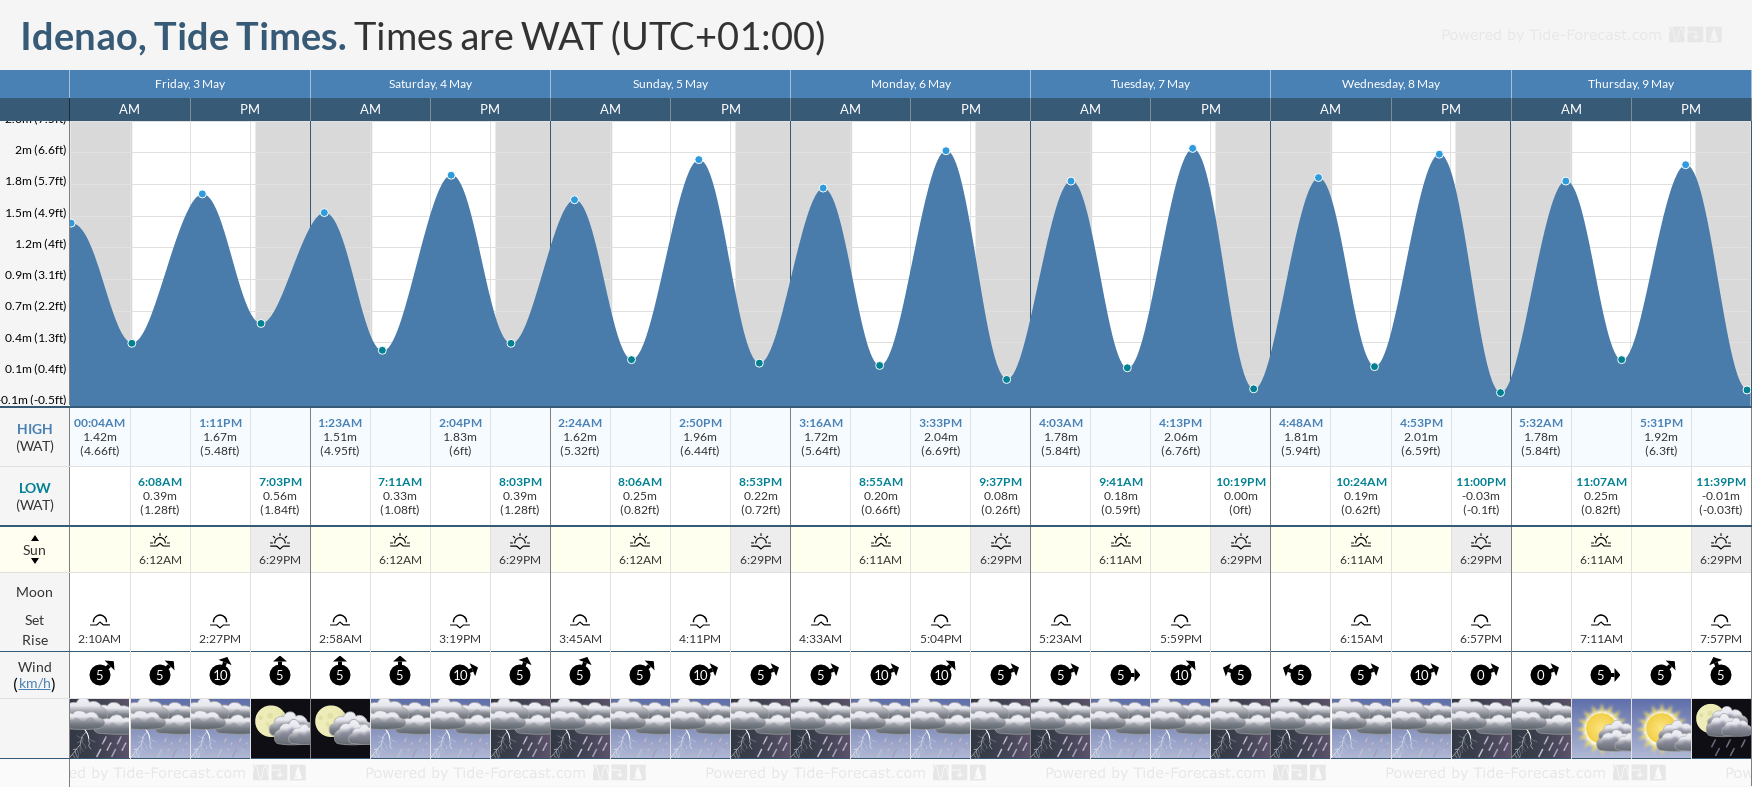 Idenao Tide Chart including high and low tide tide times for the next 7 days